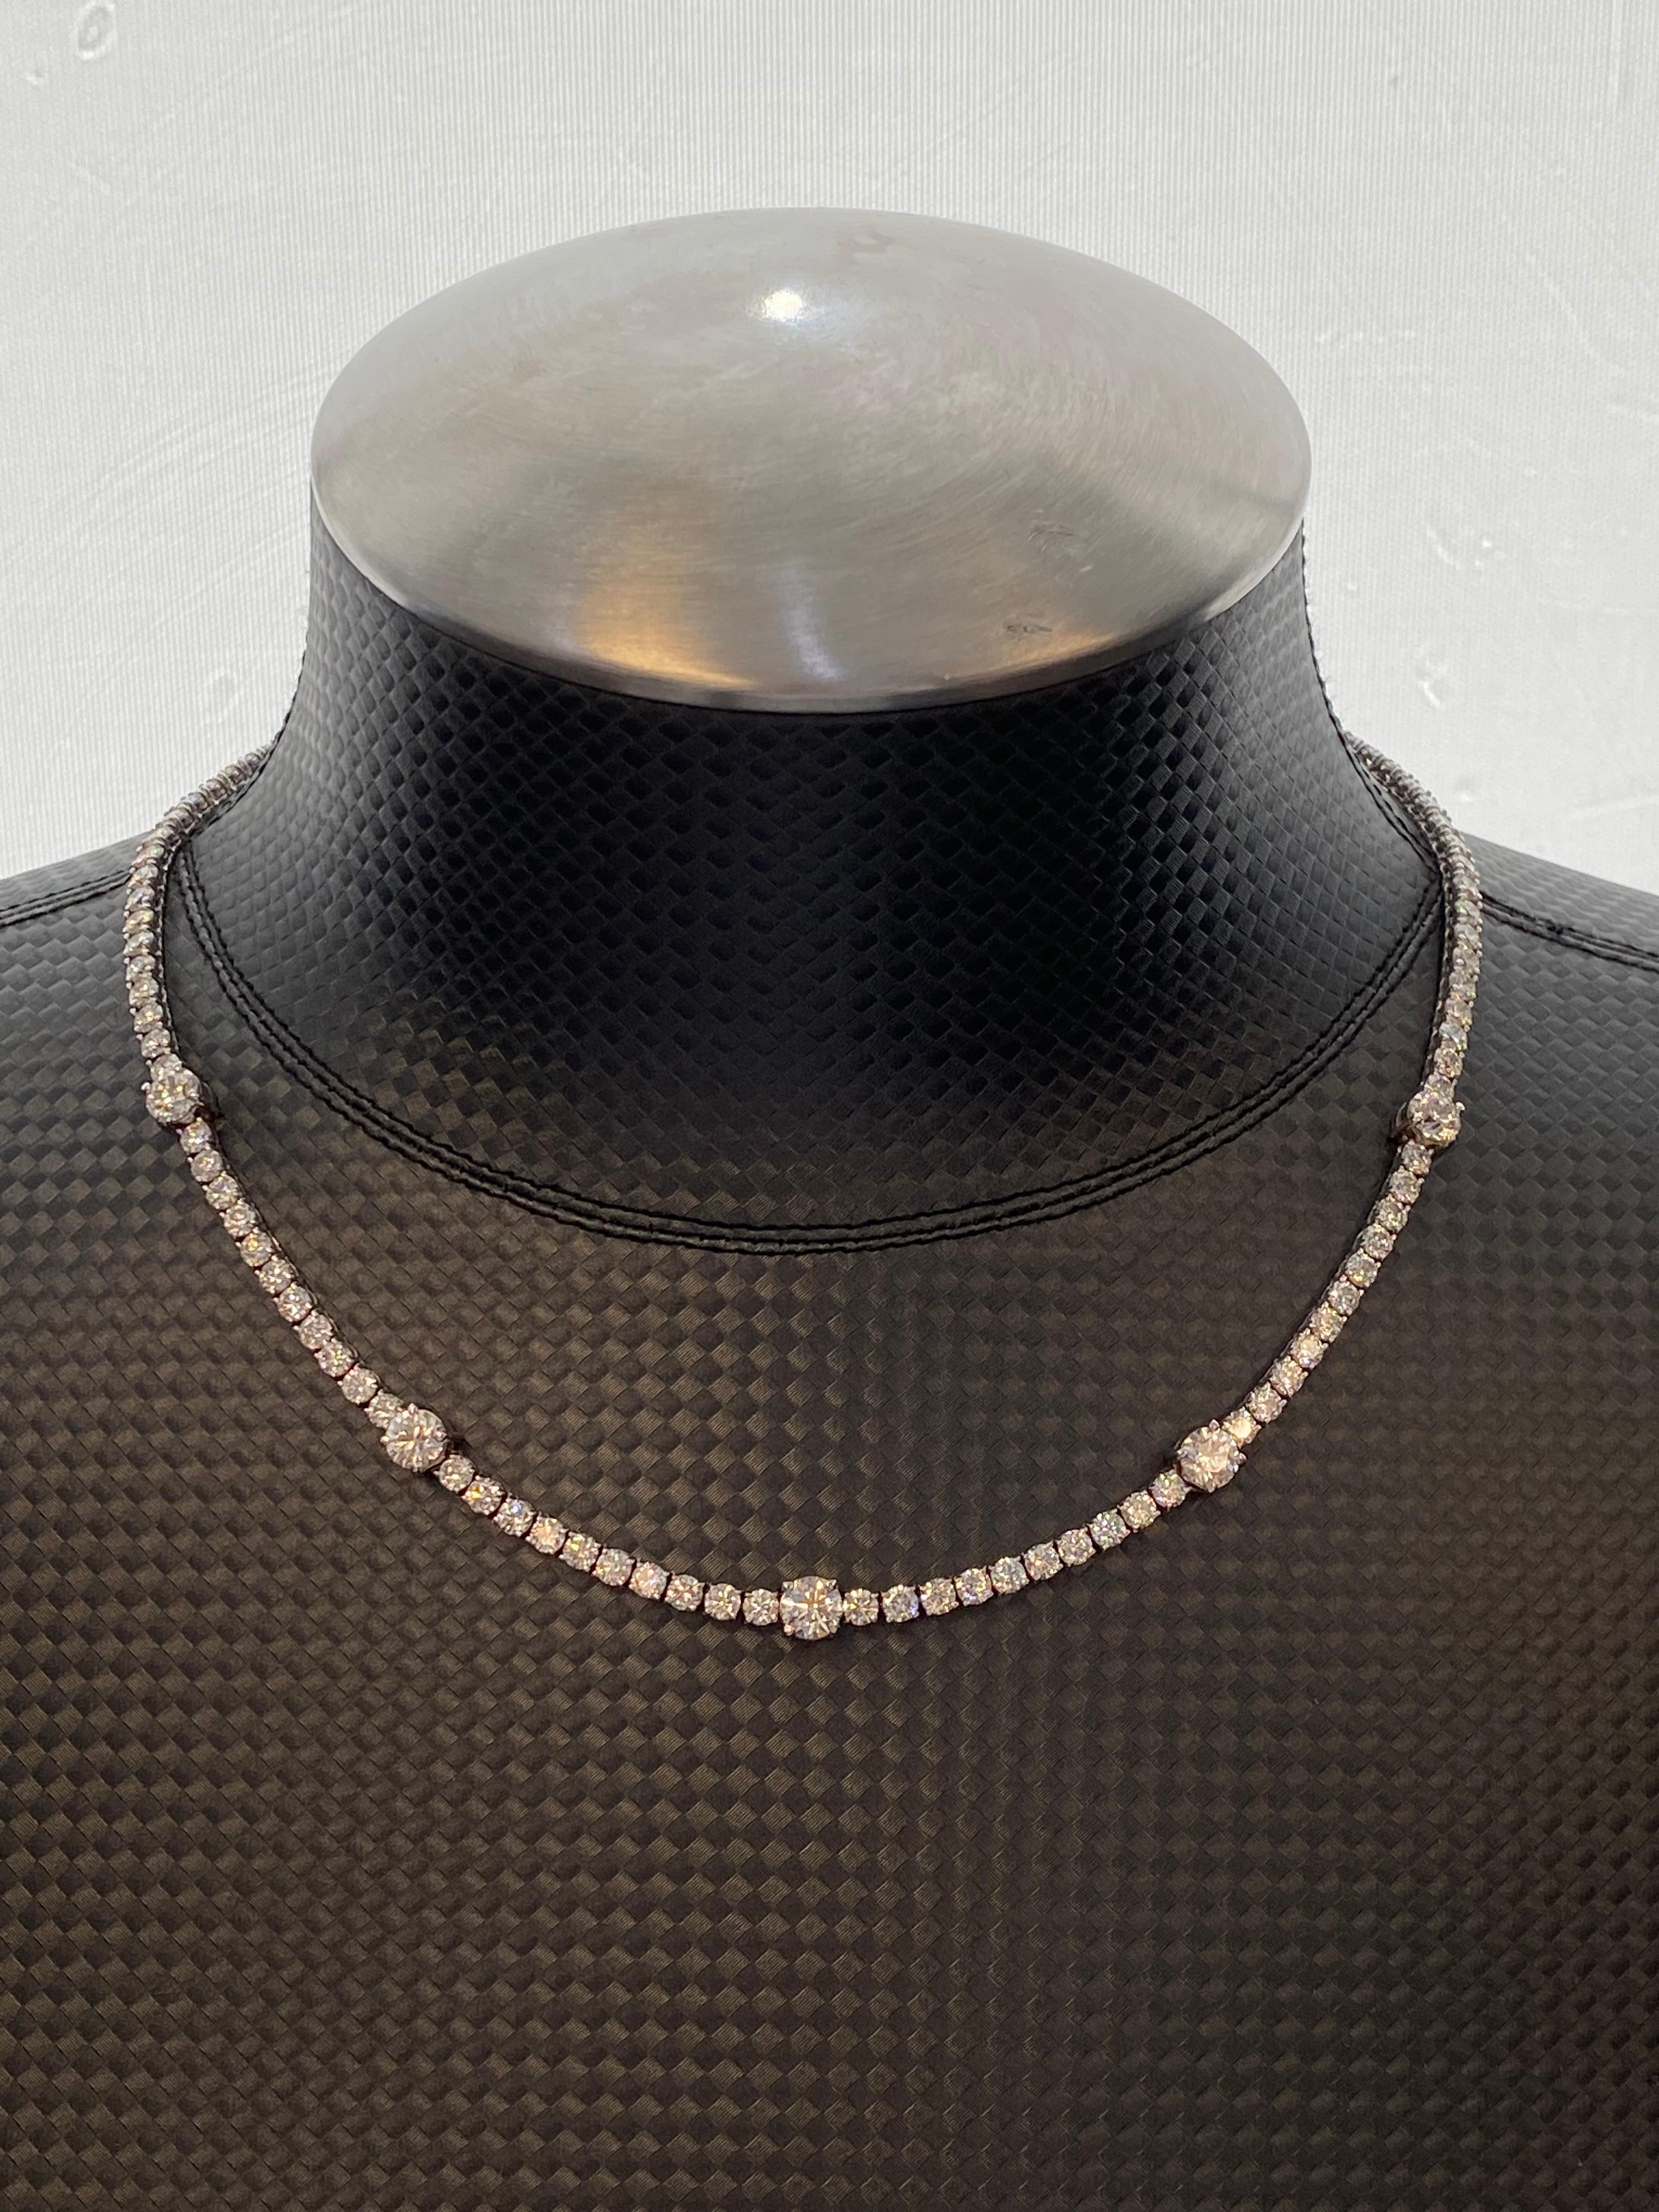 Exquisite and timeless diamonds tennis necklace. Created by Alexander of Beverly Hills.
123 round brilliant diamonds, 18.29 carats total. Five larger diamonds, averaging 0.72ct each. Approximately G/H color and VS clarity. Four prong set in 18k